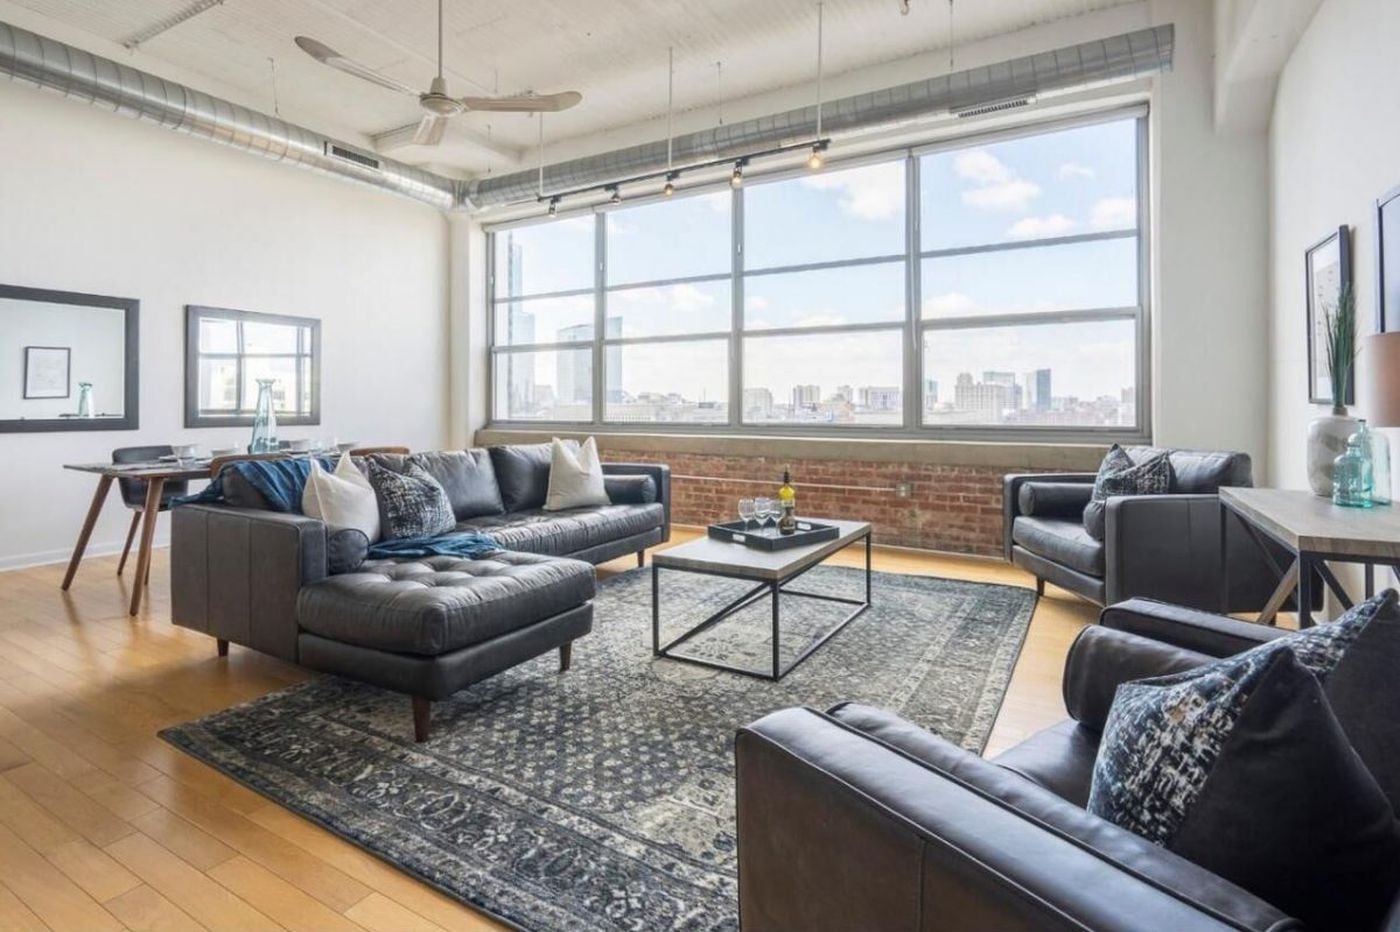 On the market in Philadelphia: Spacious one-bedroom loft with great sunset view